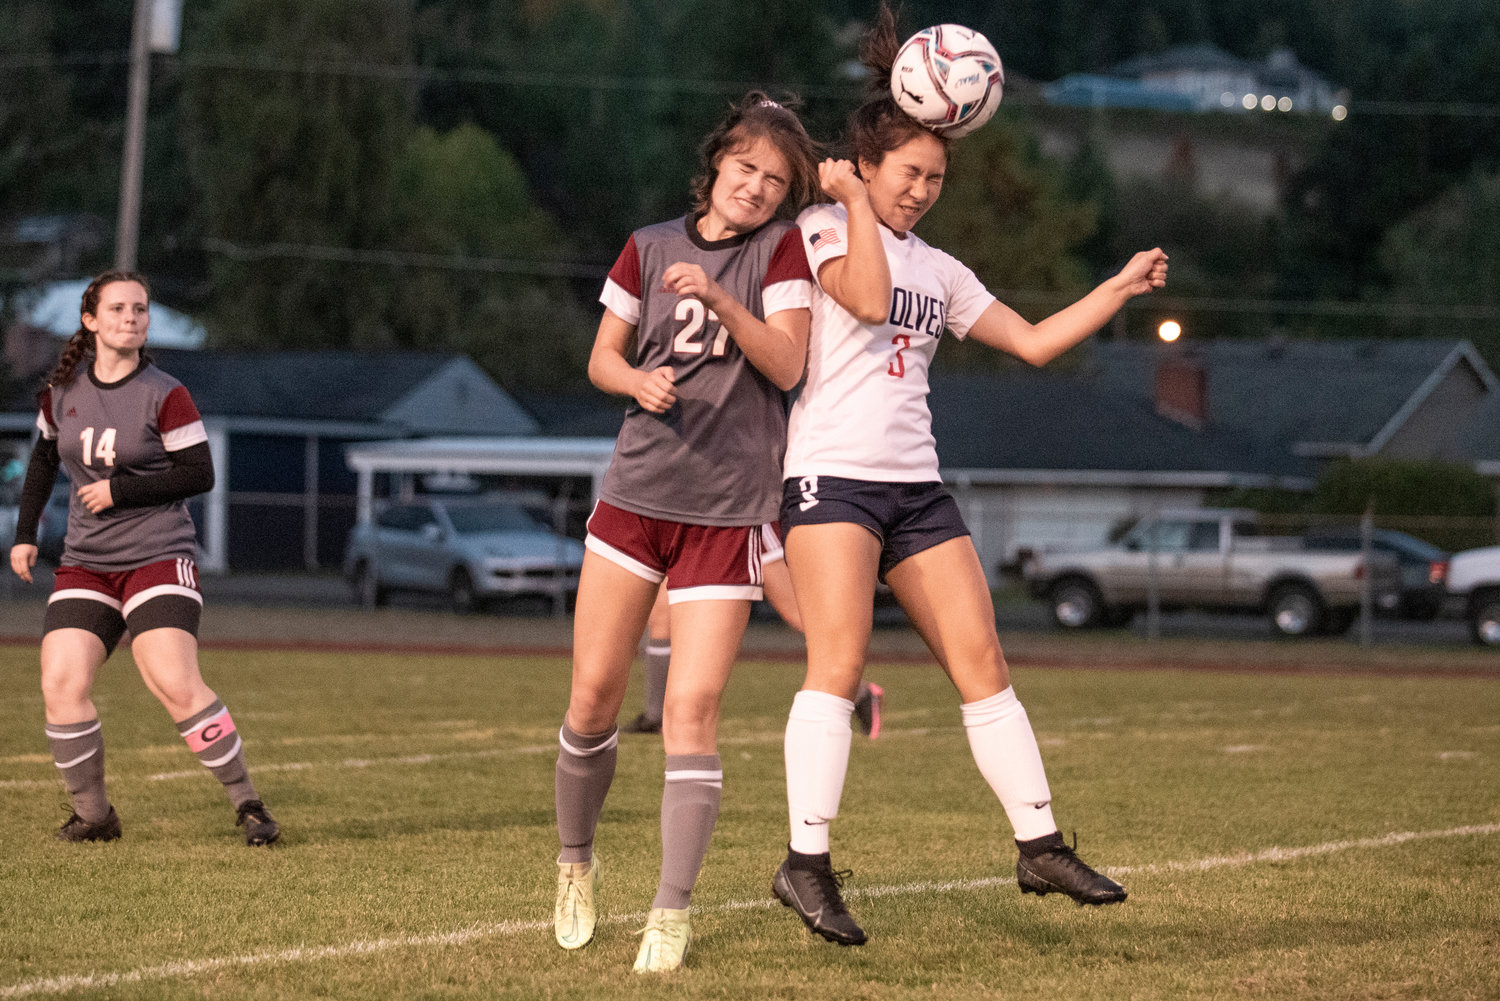 W.F. West's Audrey Toynbee (27) and Black Hills' Janey Do (3) go for a header on Tuesday in Chehalis..